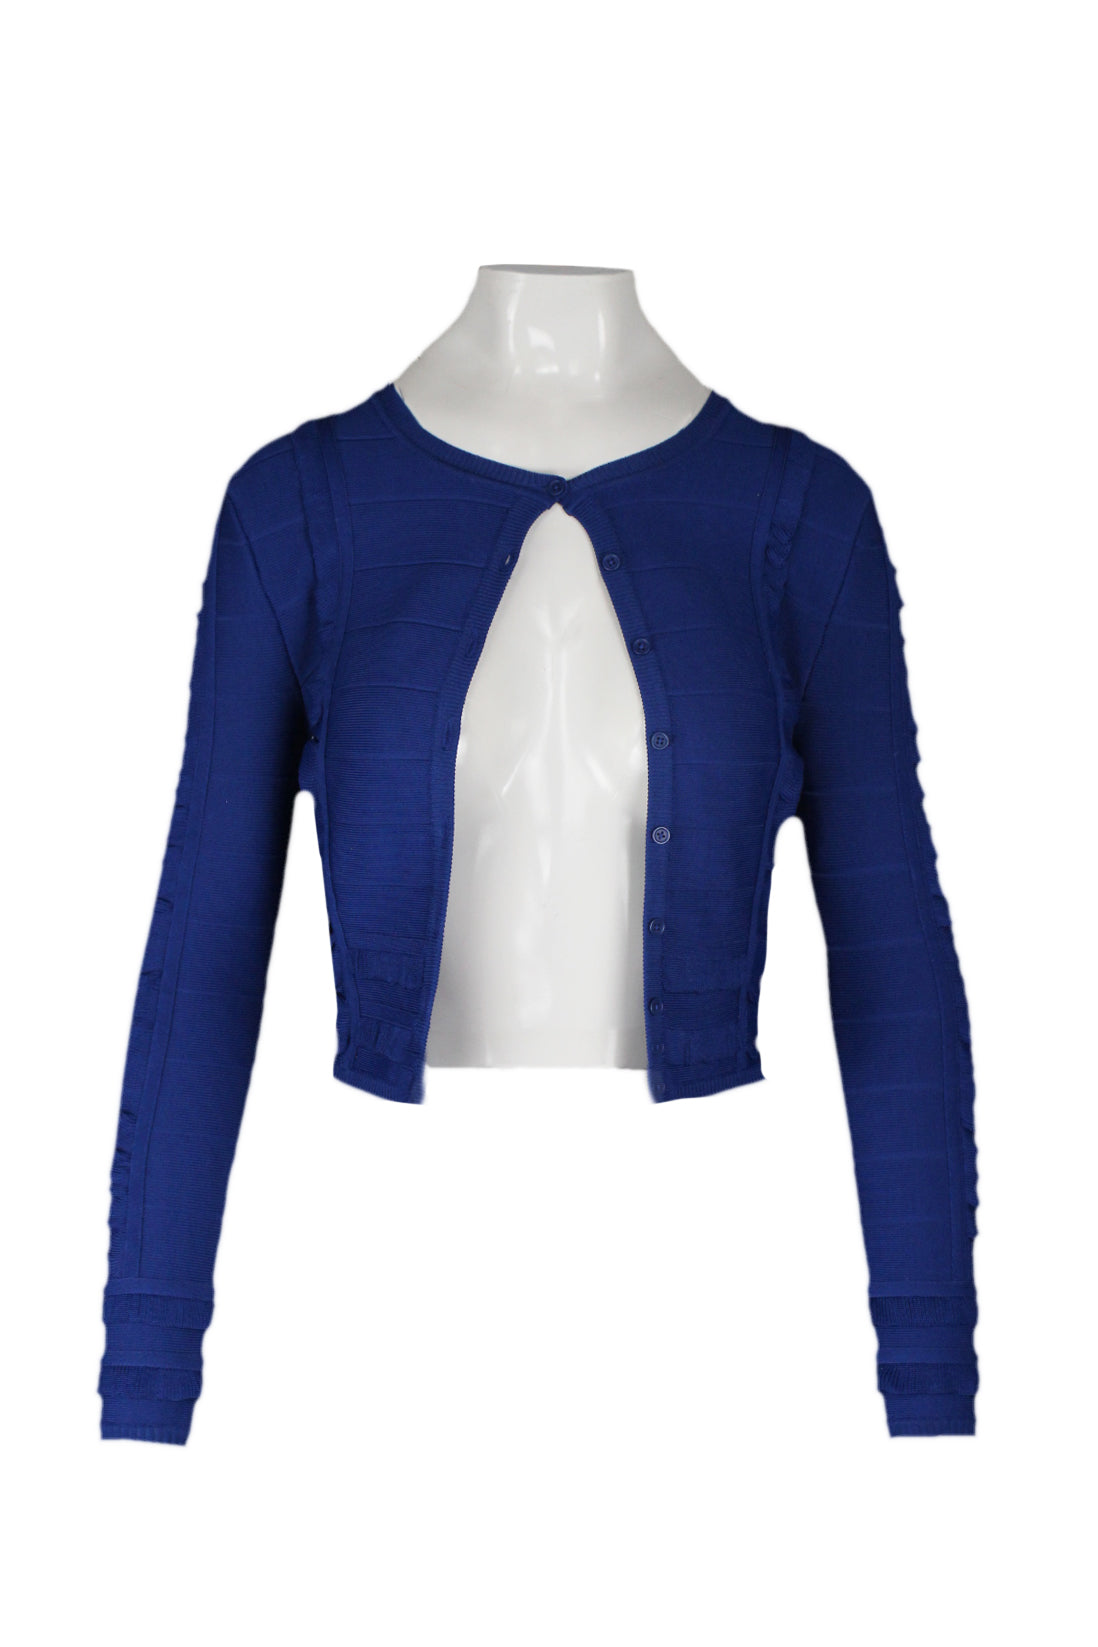 description: yigal azrouel blue long sleeve cardigan. features ruffle detailing throughout, button closure at center front, and rounded neckline.